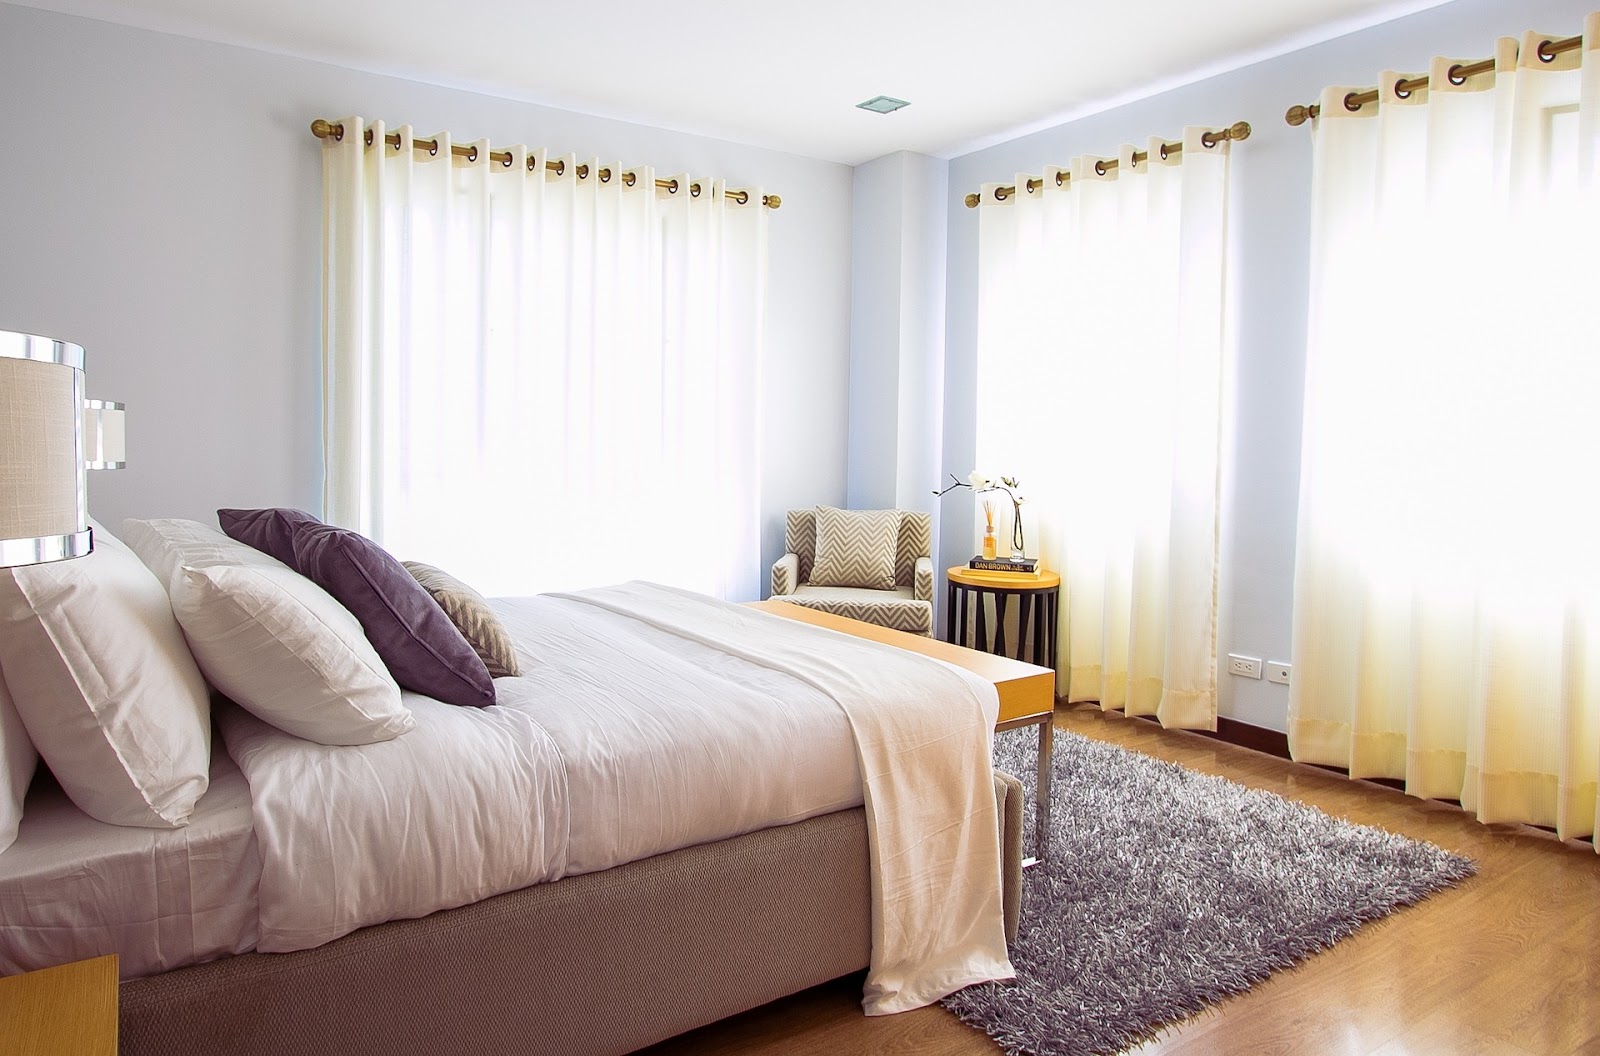 How to Choose the Right Curtains for Your Bedroom